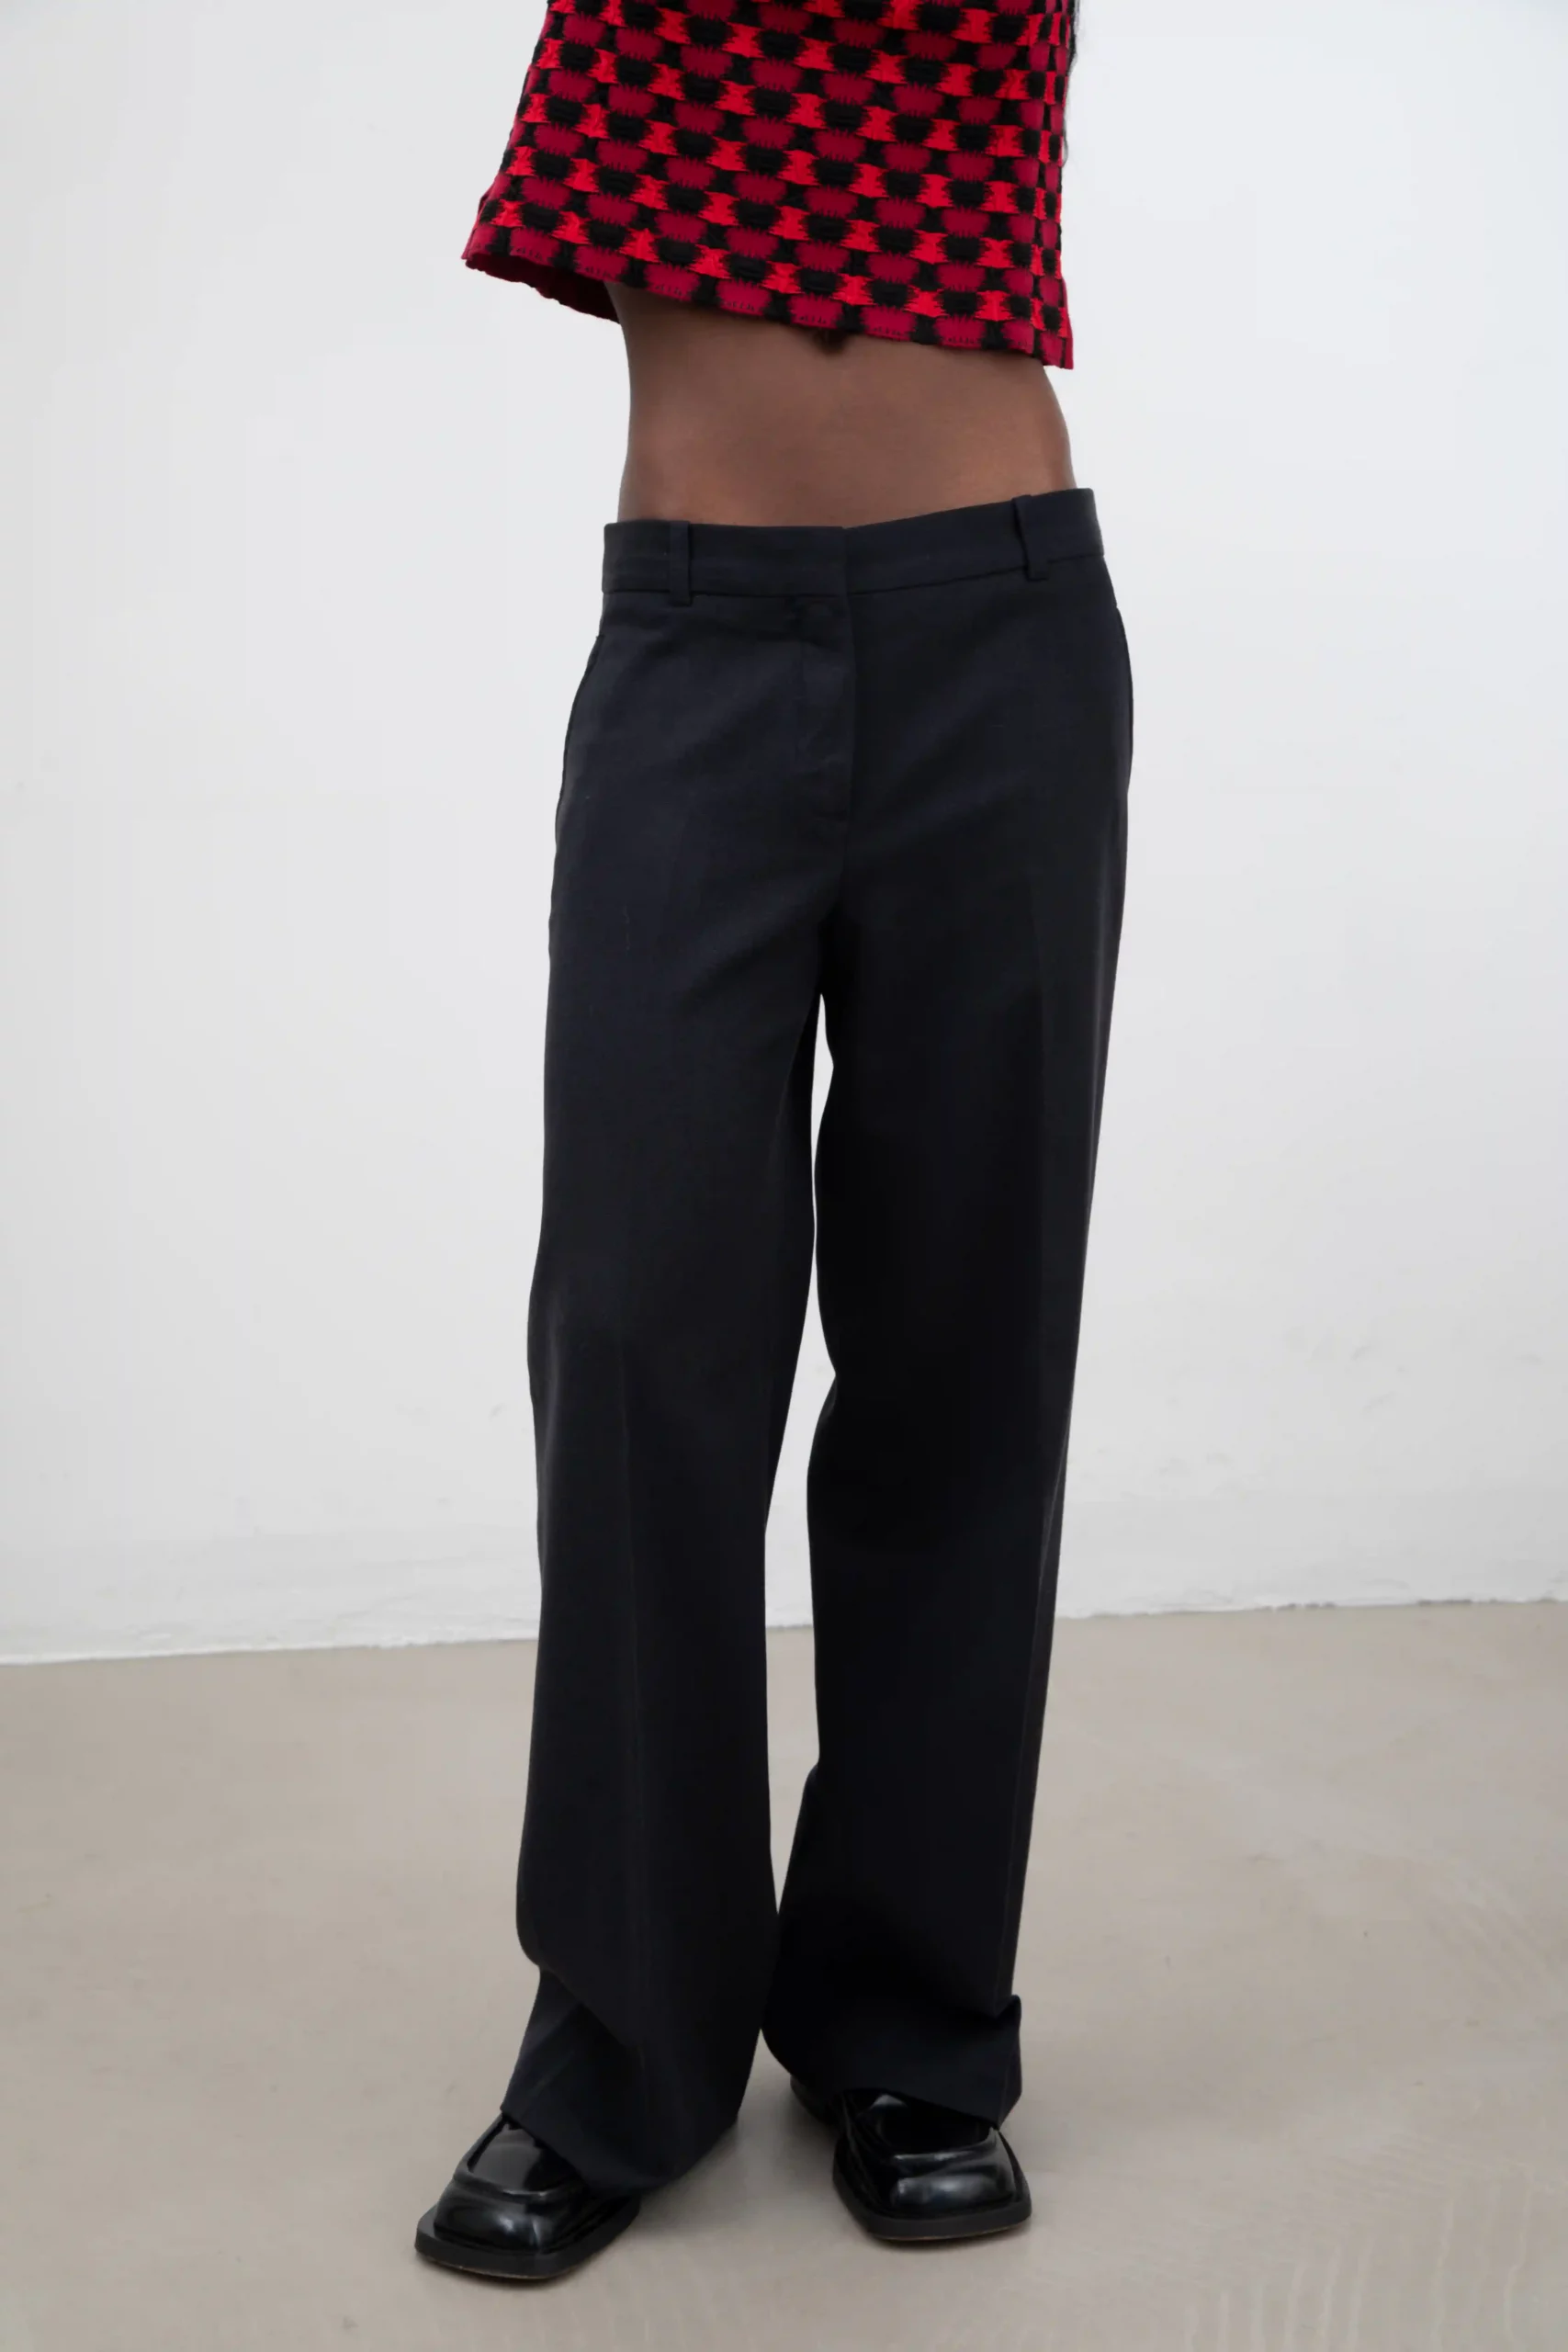 Gorgeous Miu Miu wide leg tailored pants in 65% virgin wool and 35% cotton. With front zipper and hook-and-eye closure. Side pockets. With buttoned welt pocket at back. Made in Italy.